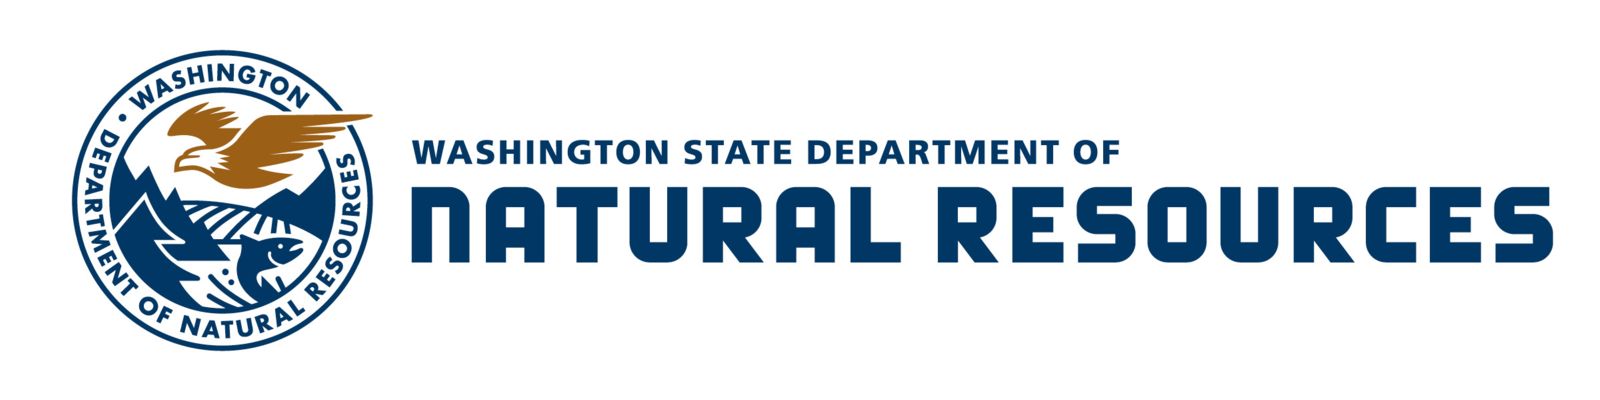 WA State Department of Natural Resources Seeks Eastern Urban Forestry Technician